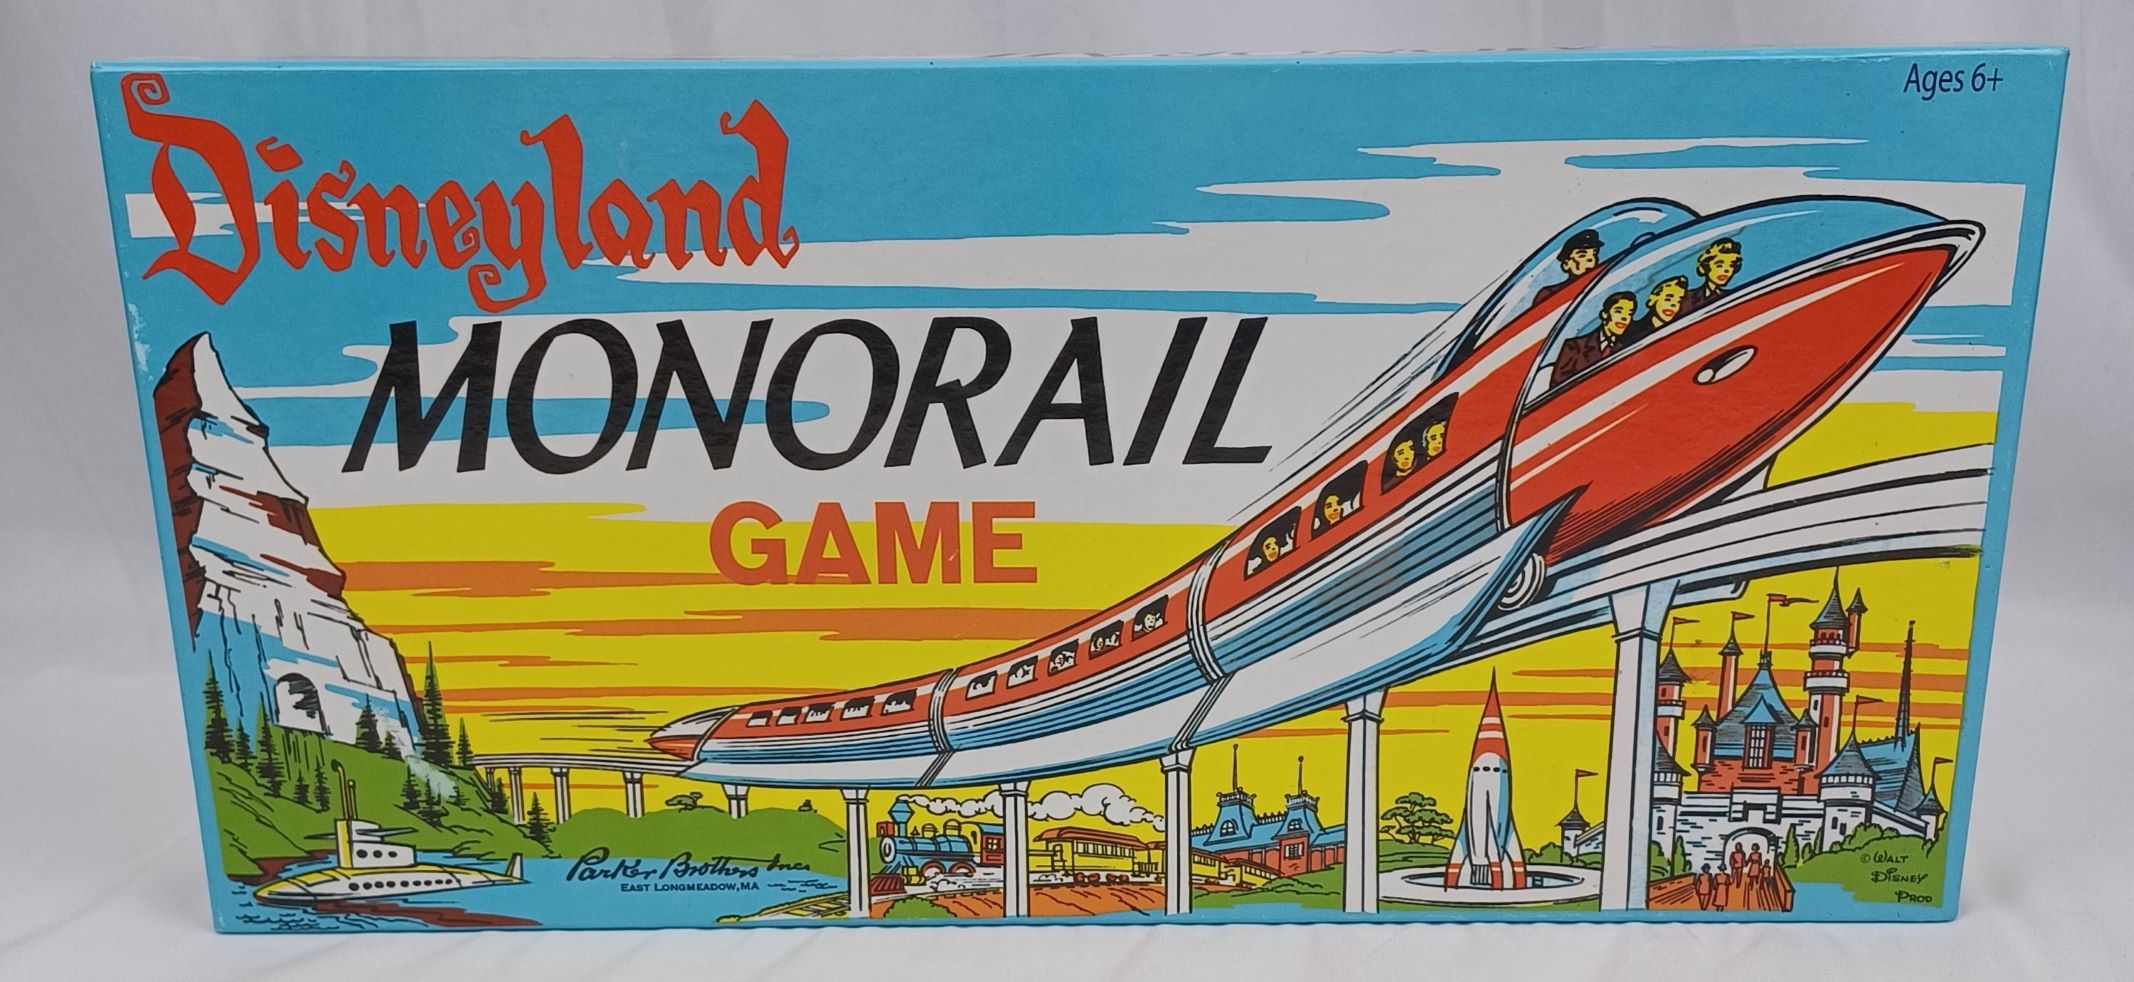 Disneyland Monorail Game Board Game Review and Rules